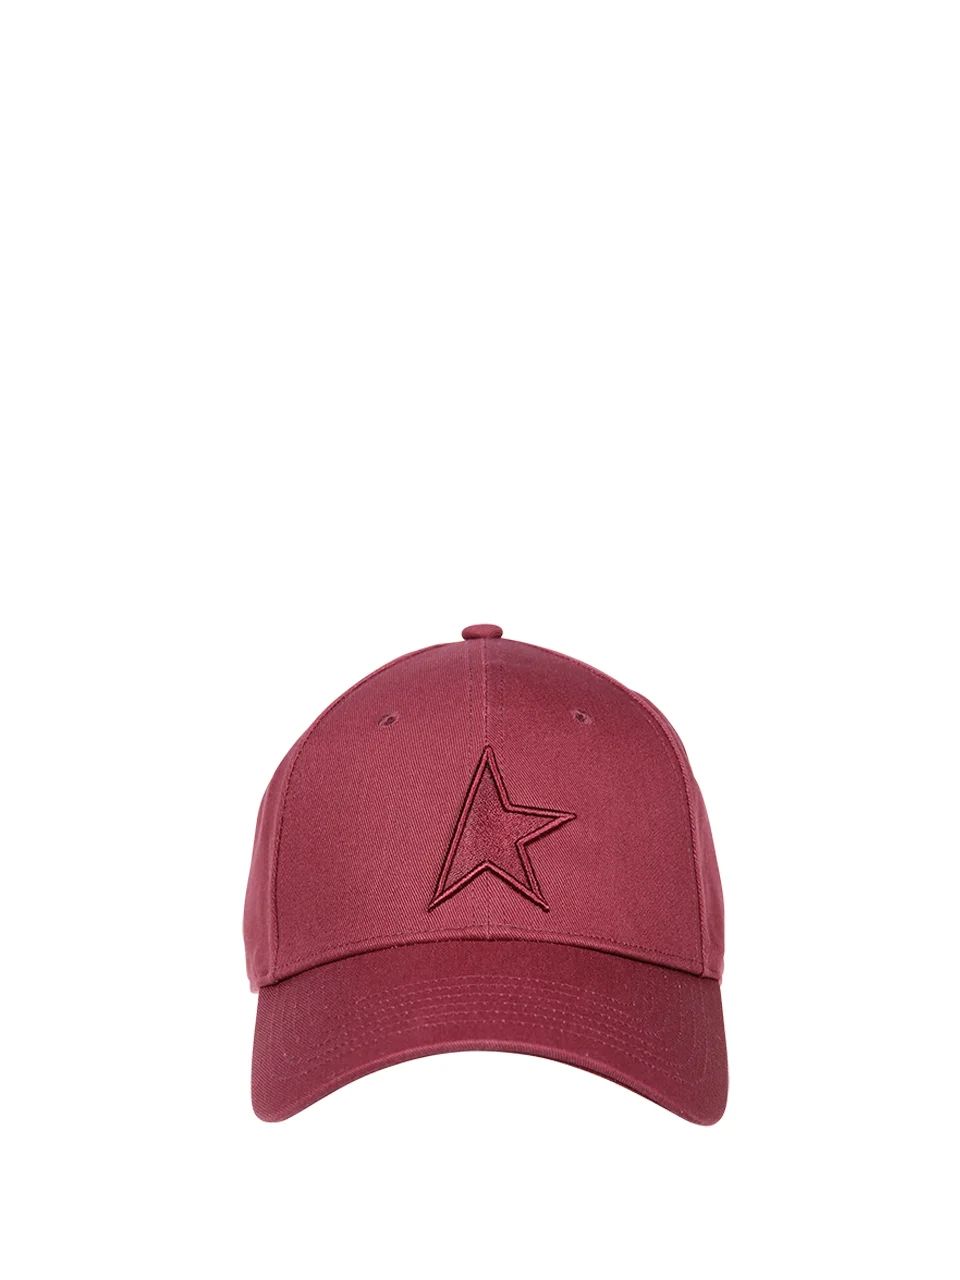 Golden Goose Deluxe Brand Star Embroidered Baseball Hat | Cettire Global